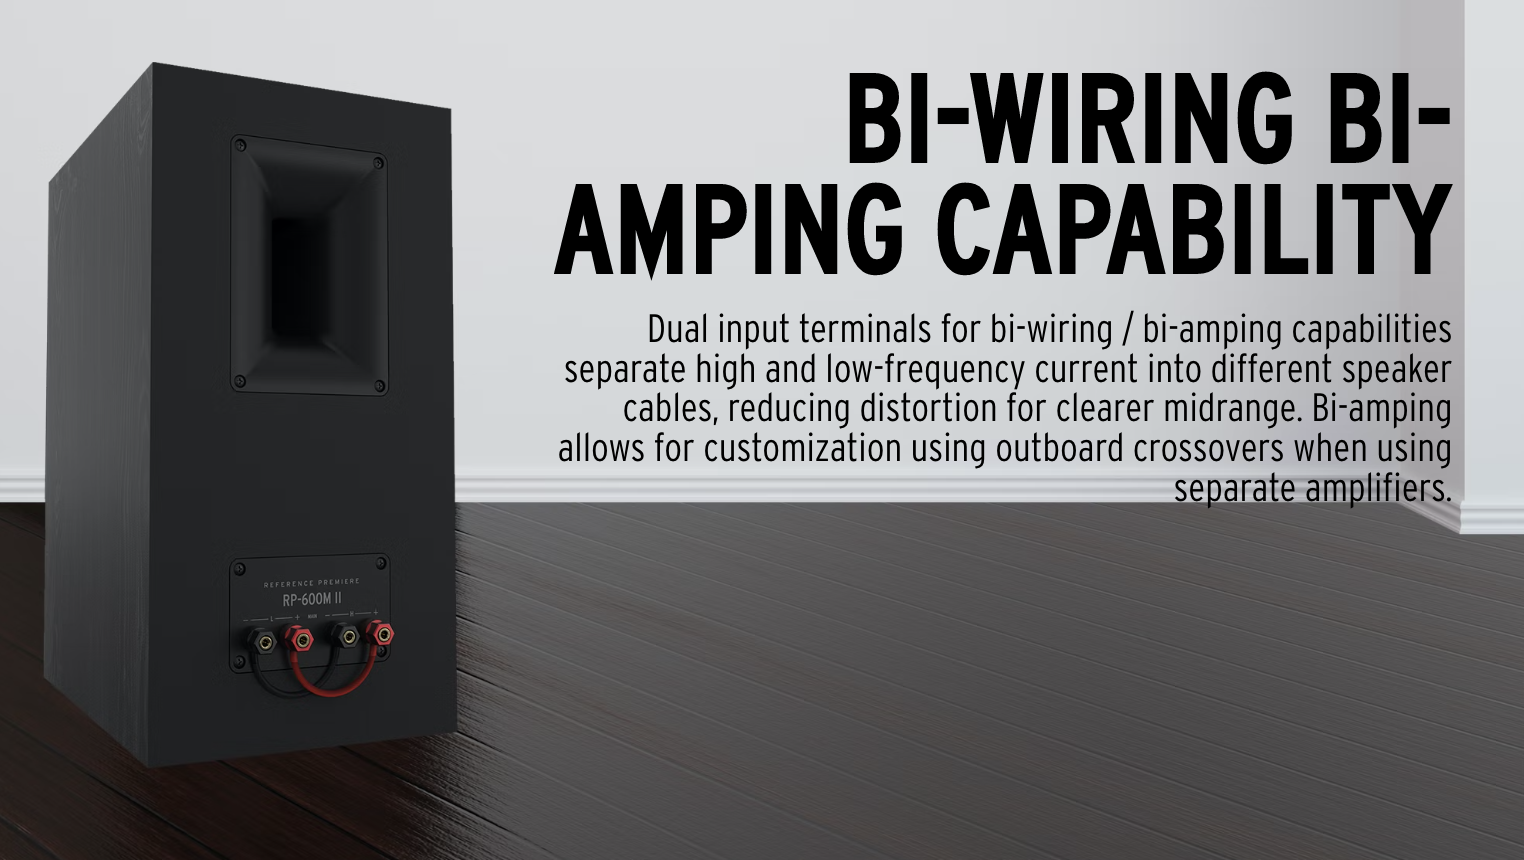 Dual input terminals for bi-wiring/bi-amping capabilities separate high and low-frequency current into different speaker cables, reducing distortion for clearer midrange. Bi-amping allows for customization using outboard crossovers when using separate amplifiers. 